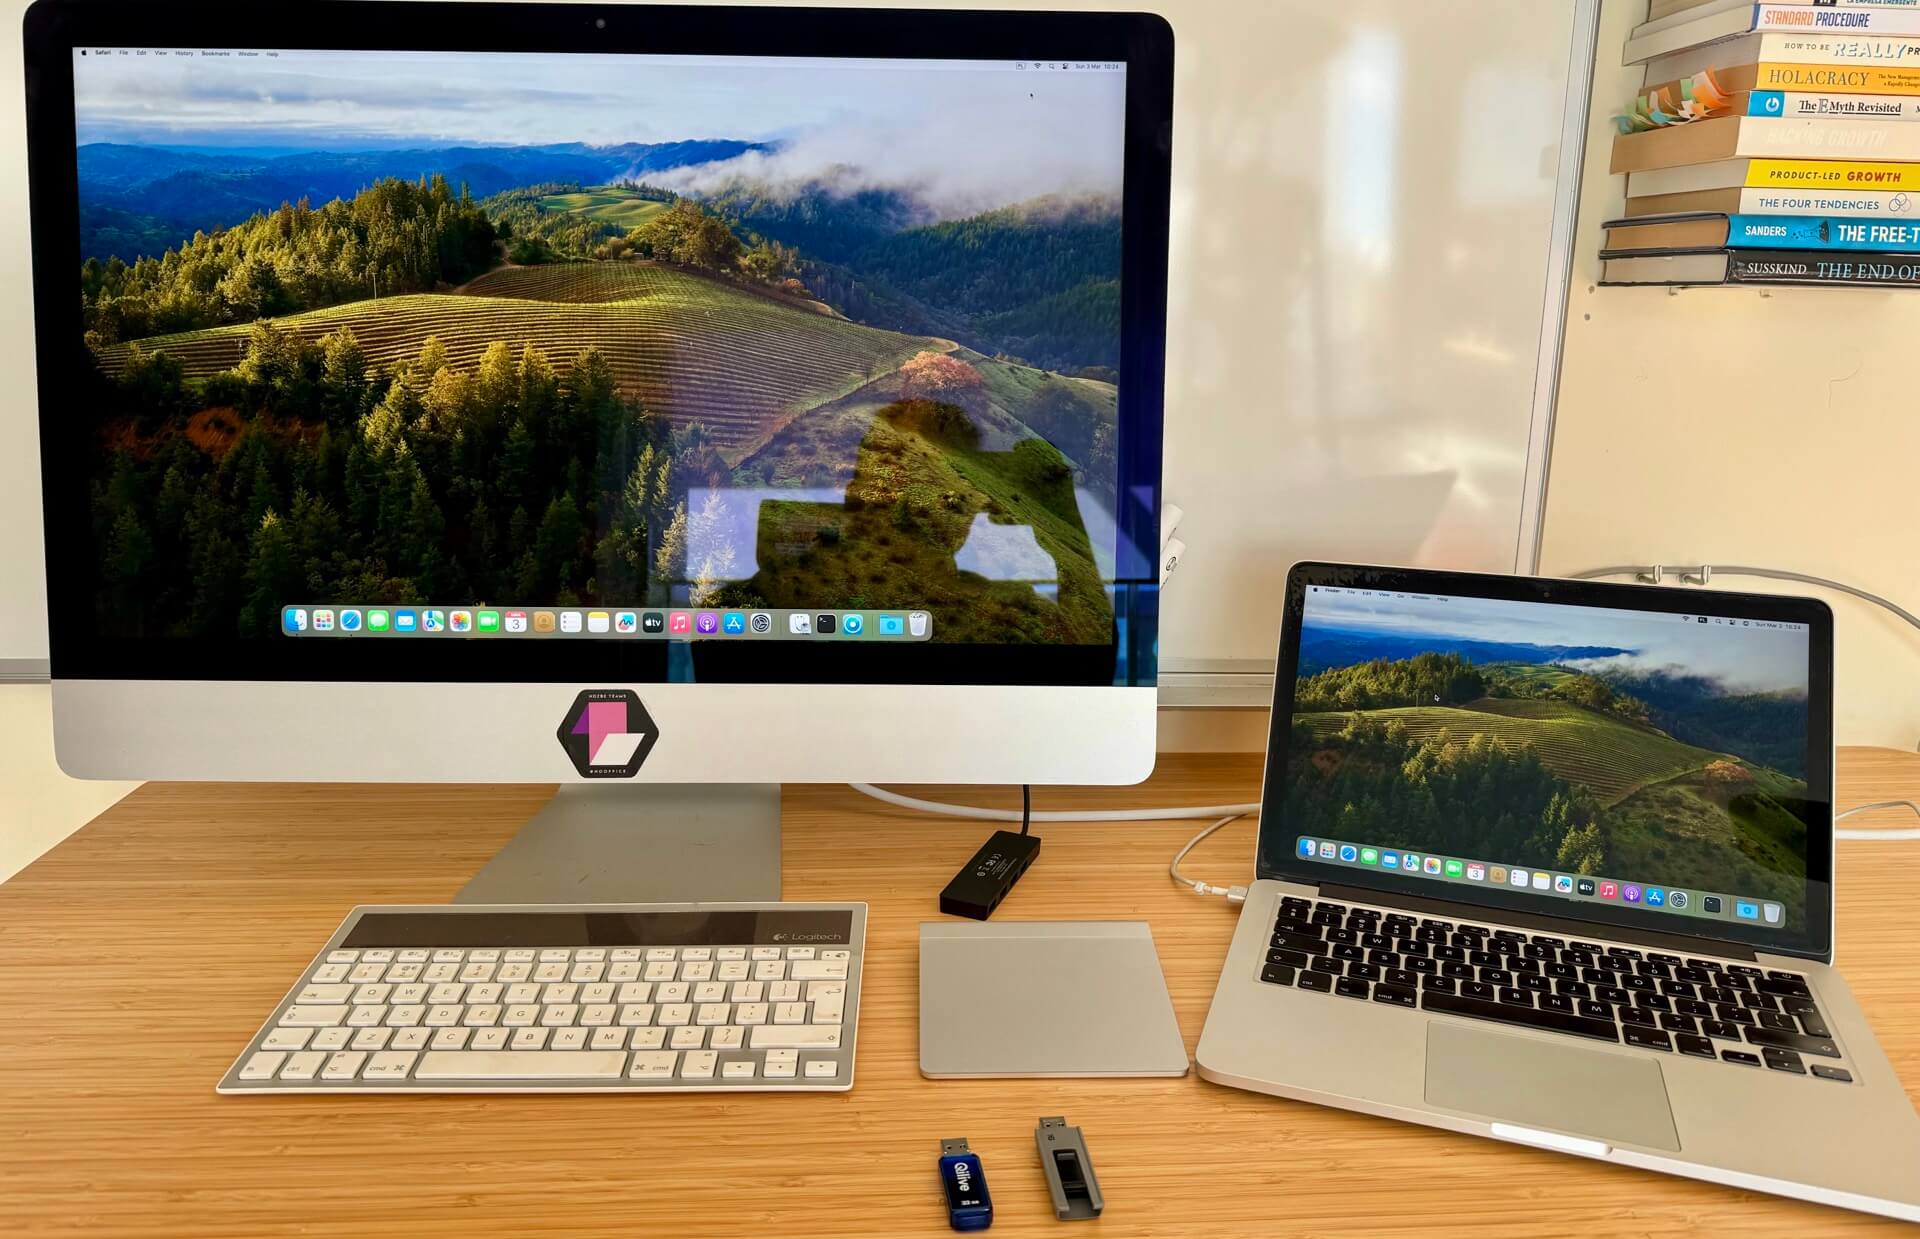 How I upgraded old iMac and MacBook Pro to the latest MacOS giving them a second life!